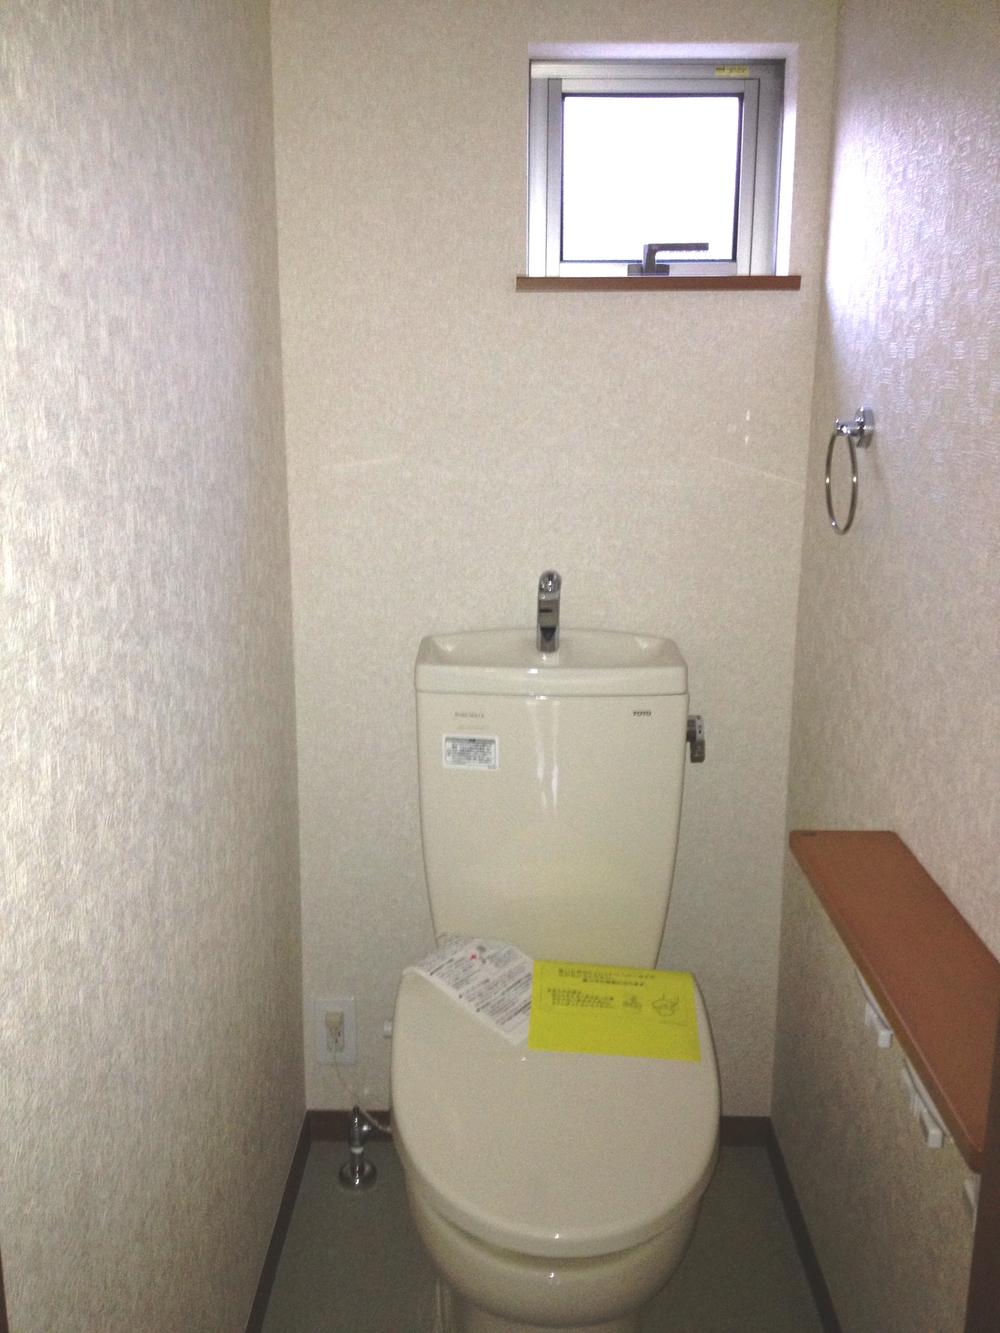 Other Equipment. It has also adopted a hygienic shower cleaning type of toilet in either the first floor second floor. It has established a handrail to facilitate rising from the toilet seat. 